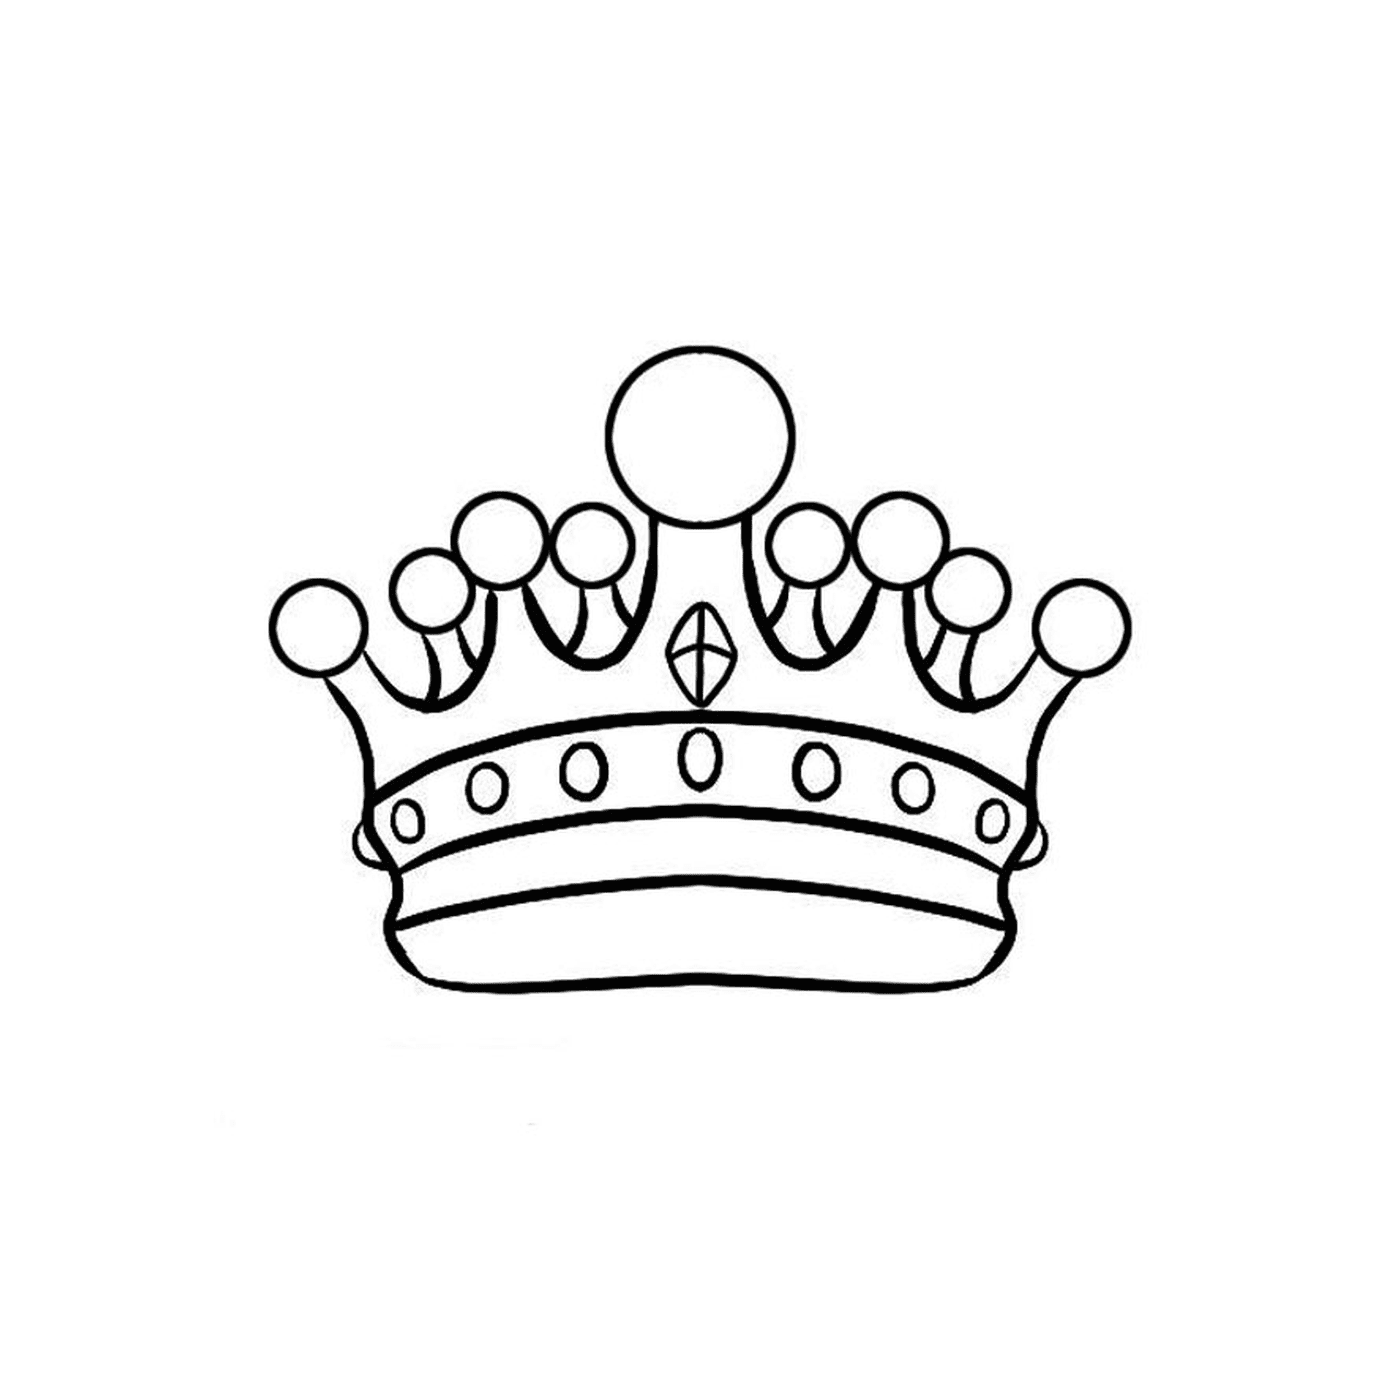  A crown on a white background 